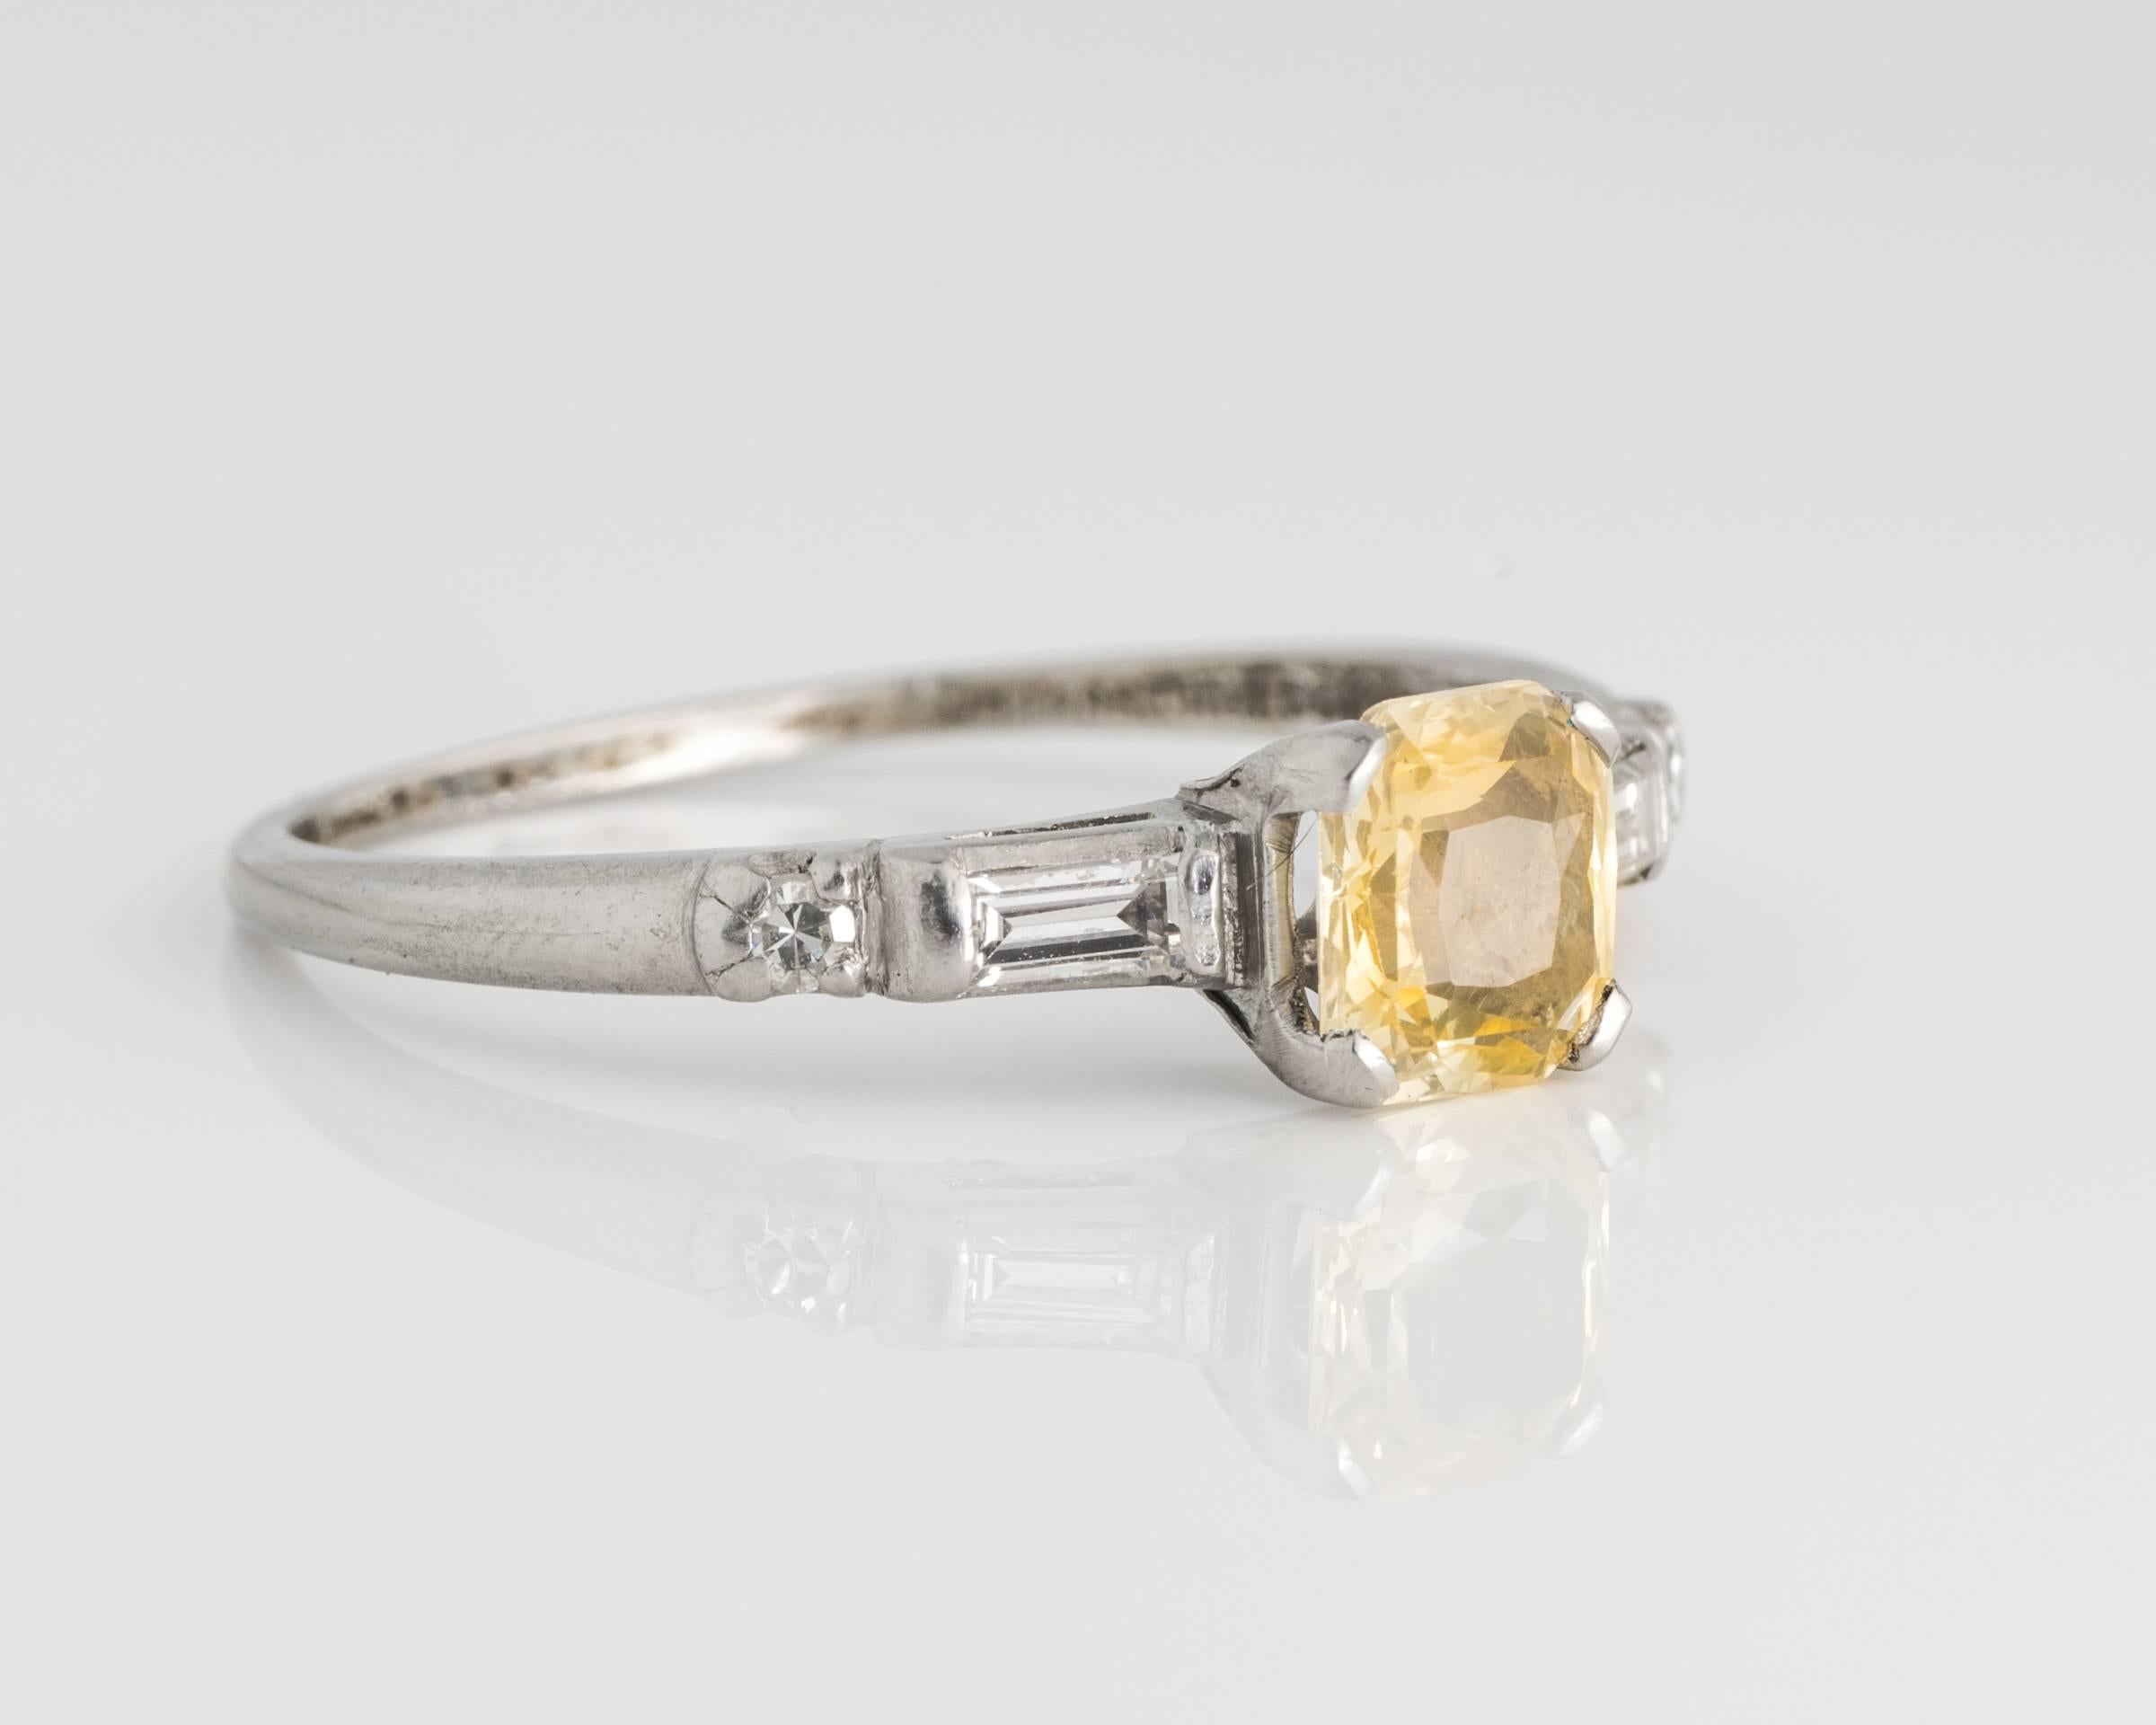 Retro 1945 Platinum Engagement Ring with Canary Yellow Sapphire and Diamonds